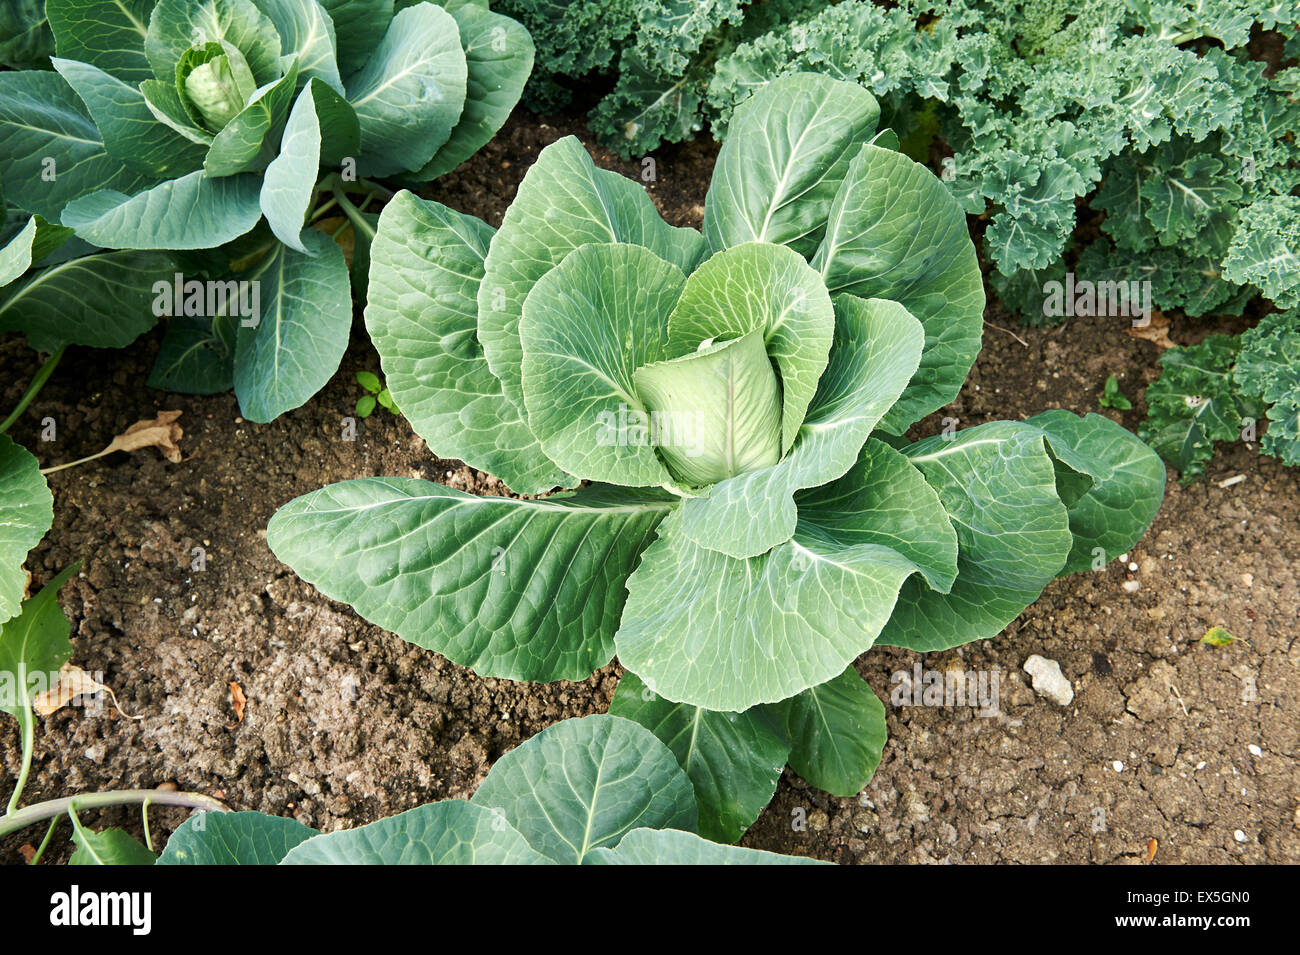 Cabbage Plants Growing in a Vegetable Garden. Stock Photo